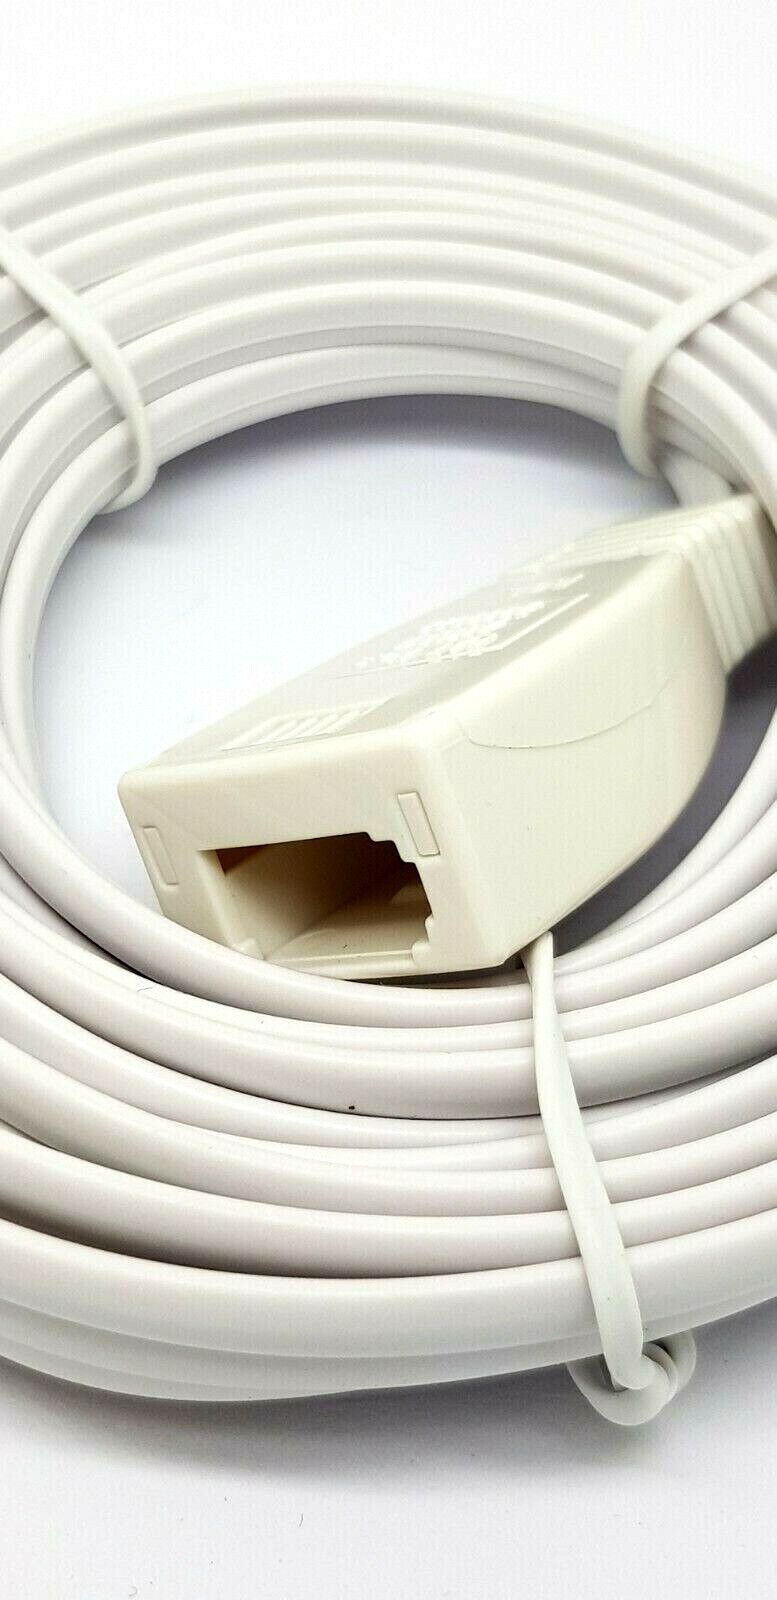 20m Telephone Extension Lead Cable HQ Flat Slimline Phone Line BT Virgin Fax